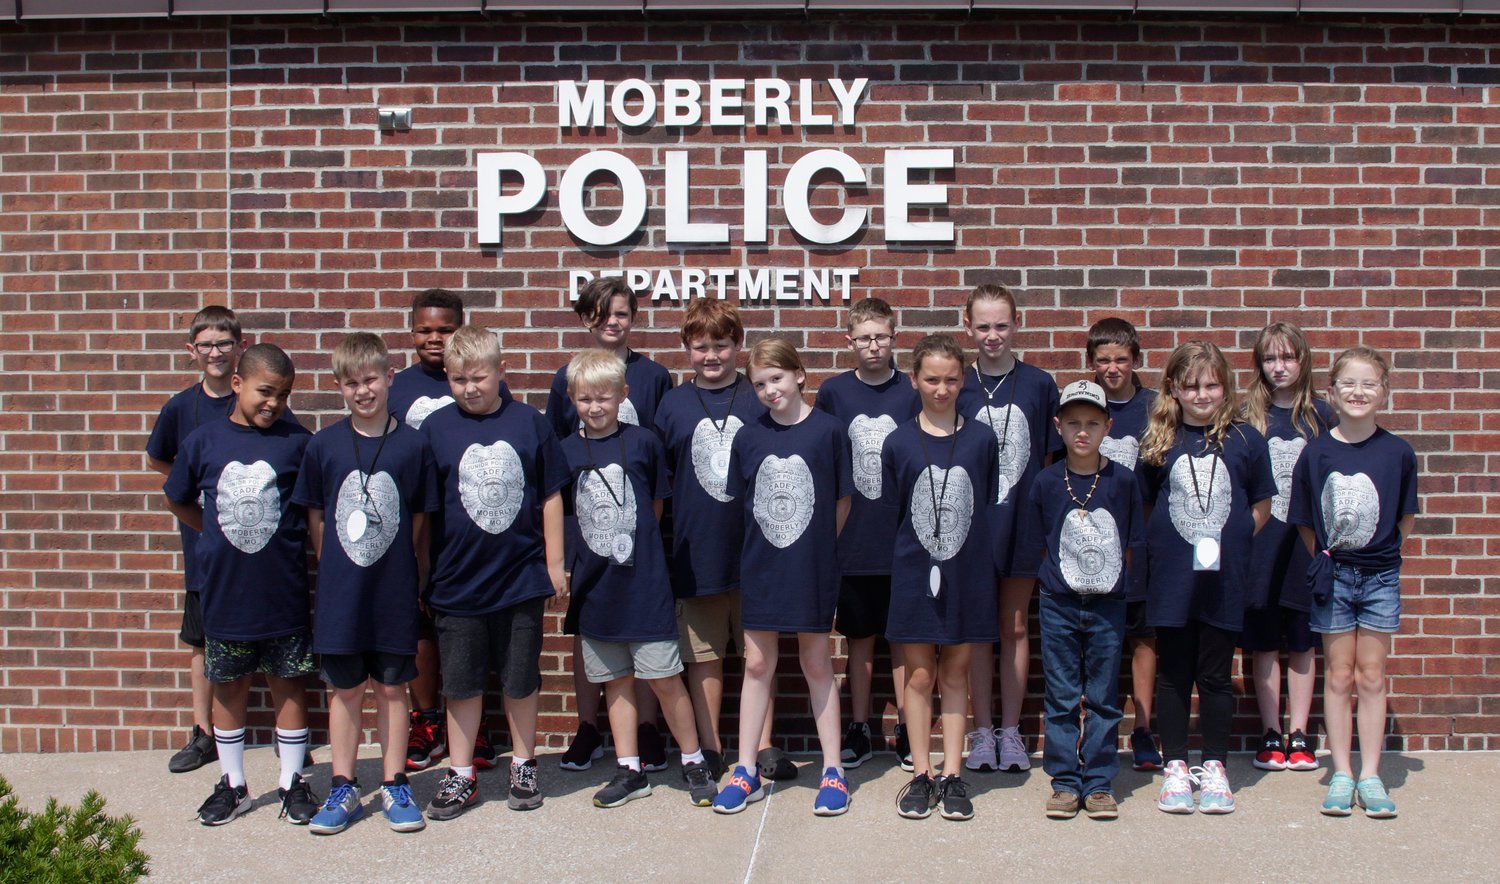 These 17 children ranging in age from 8-12 year olds participated in Moberly's 2021 Jr. Police Academy held July 26-30.